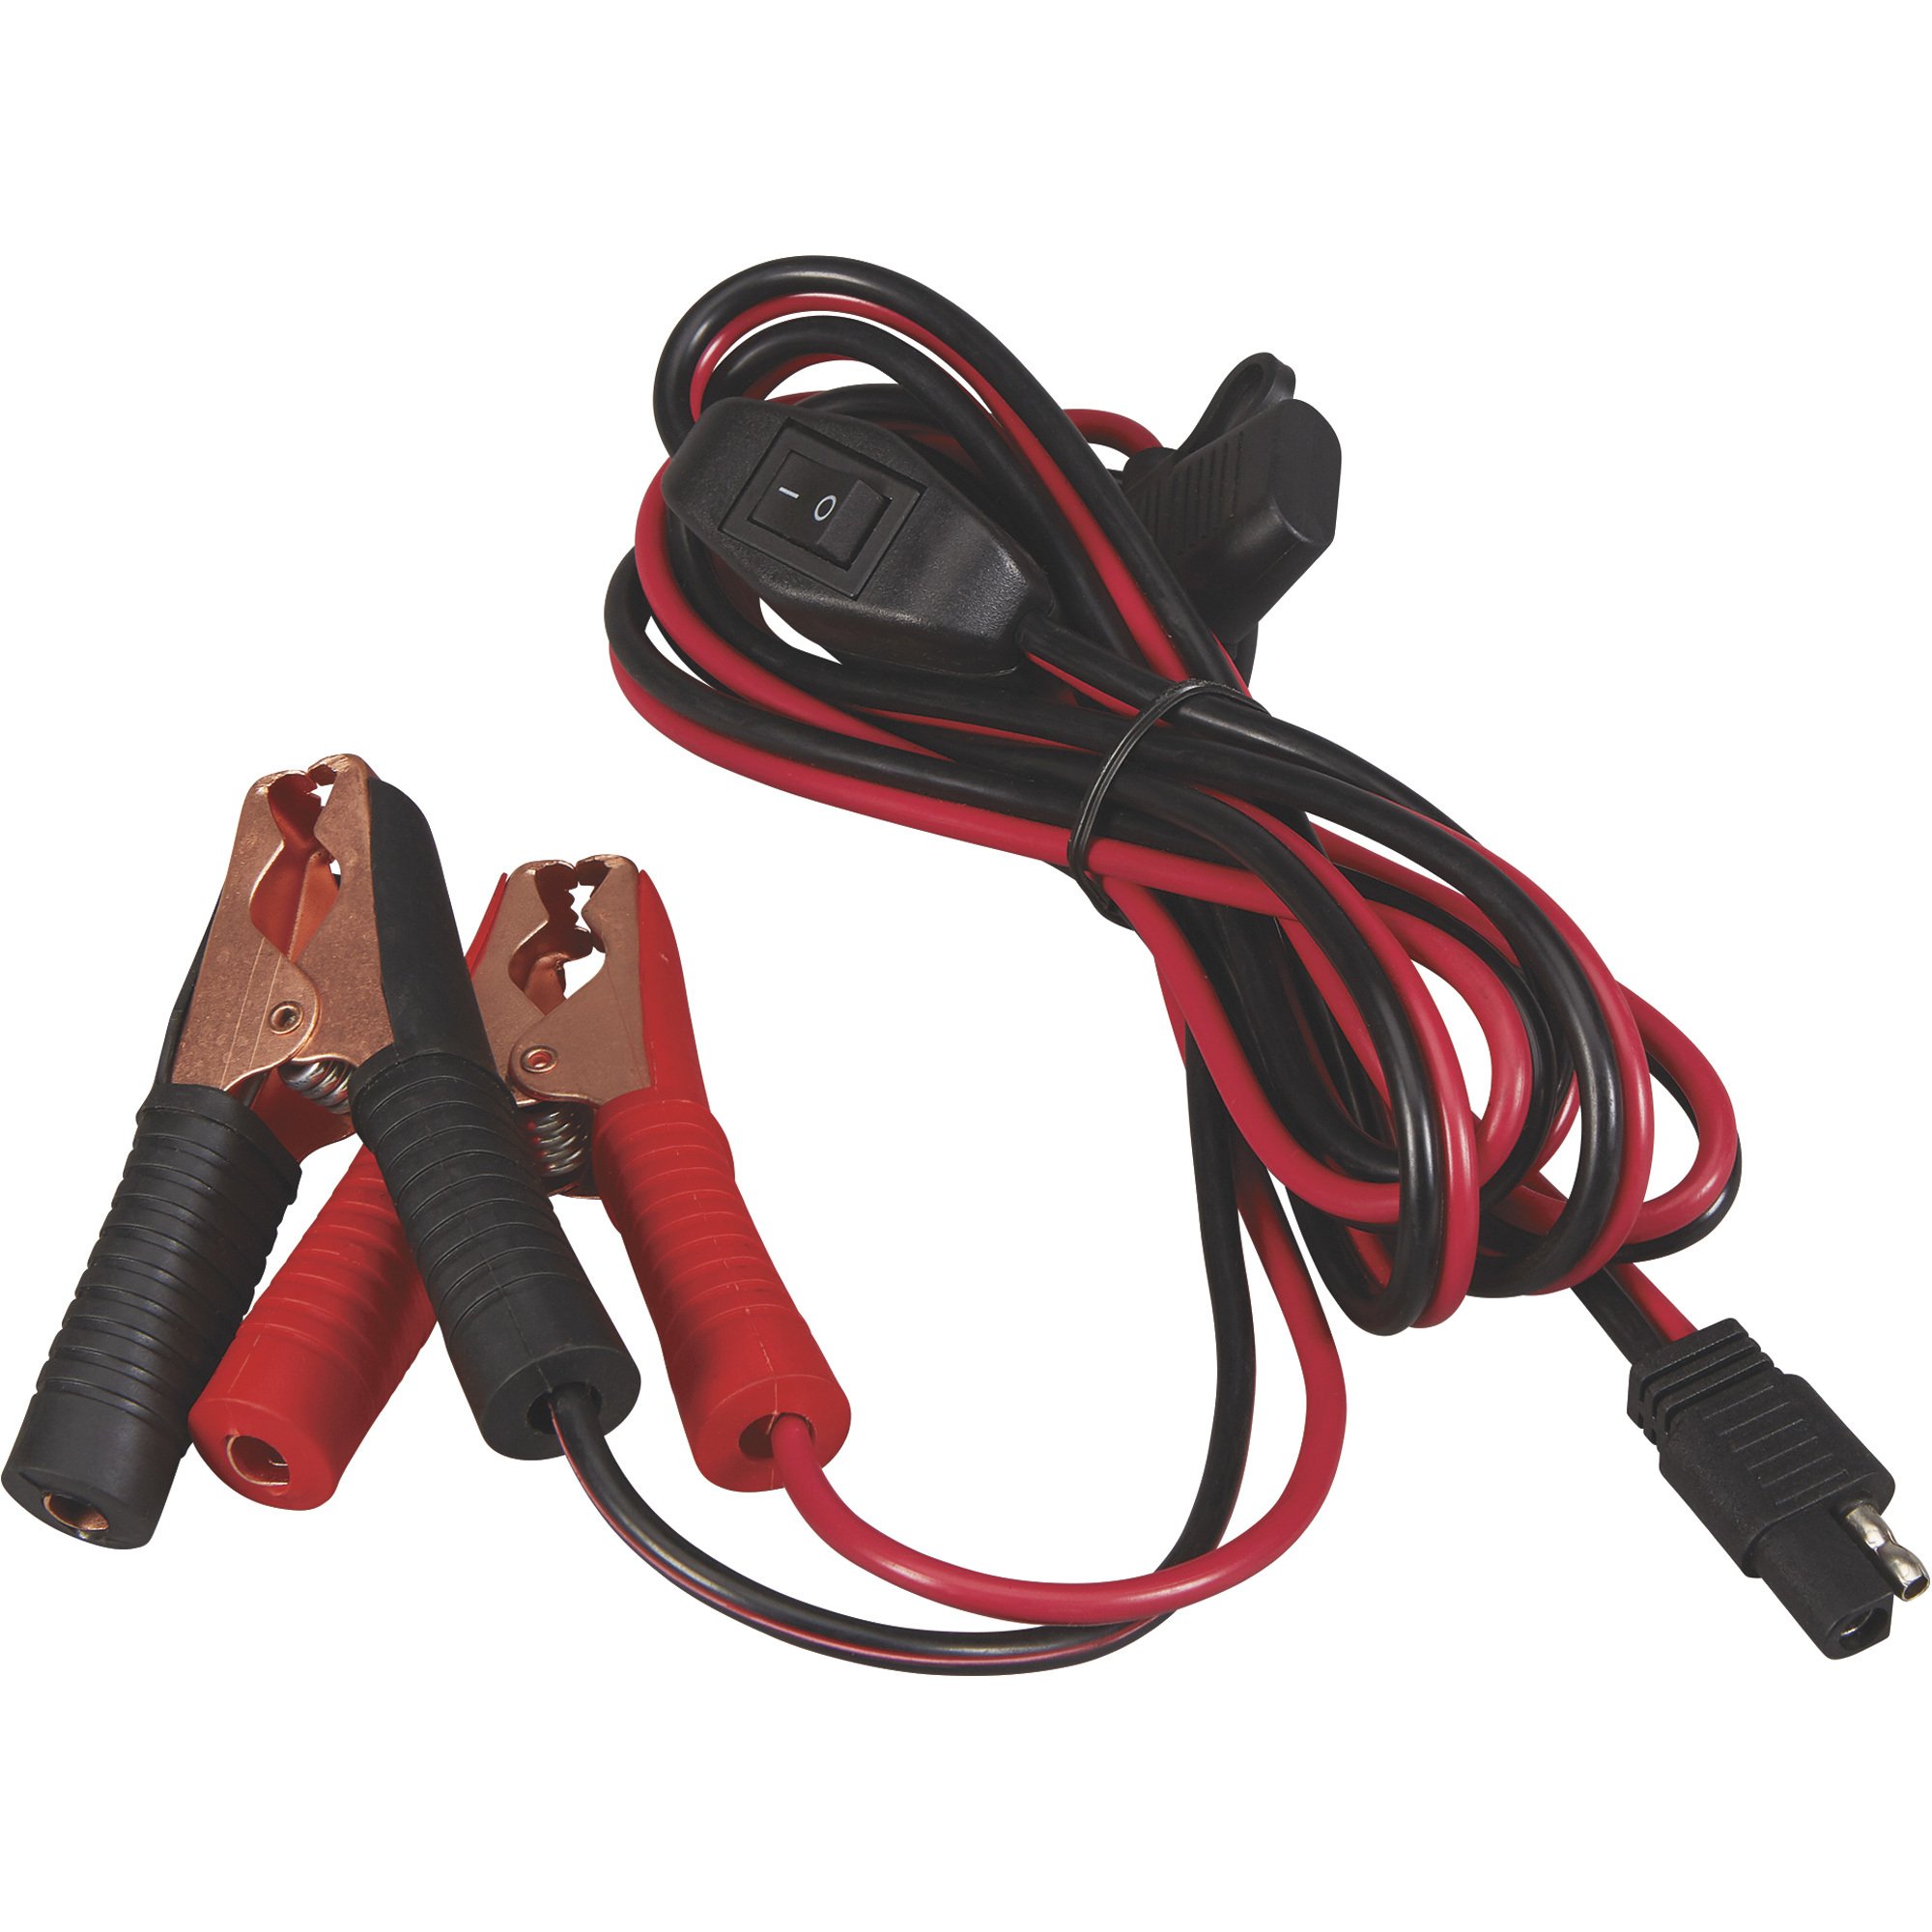 NorthStar Remote Sprayer Switch Kit — Works with Systems Up to 20 Amps, 12  Volt